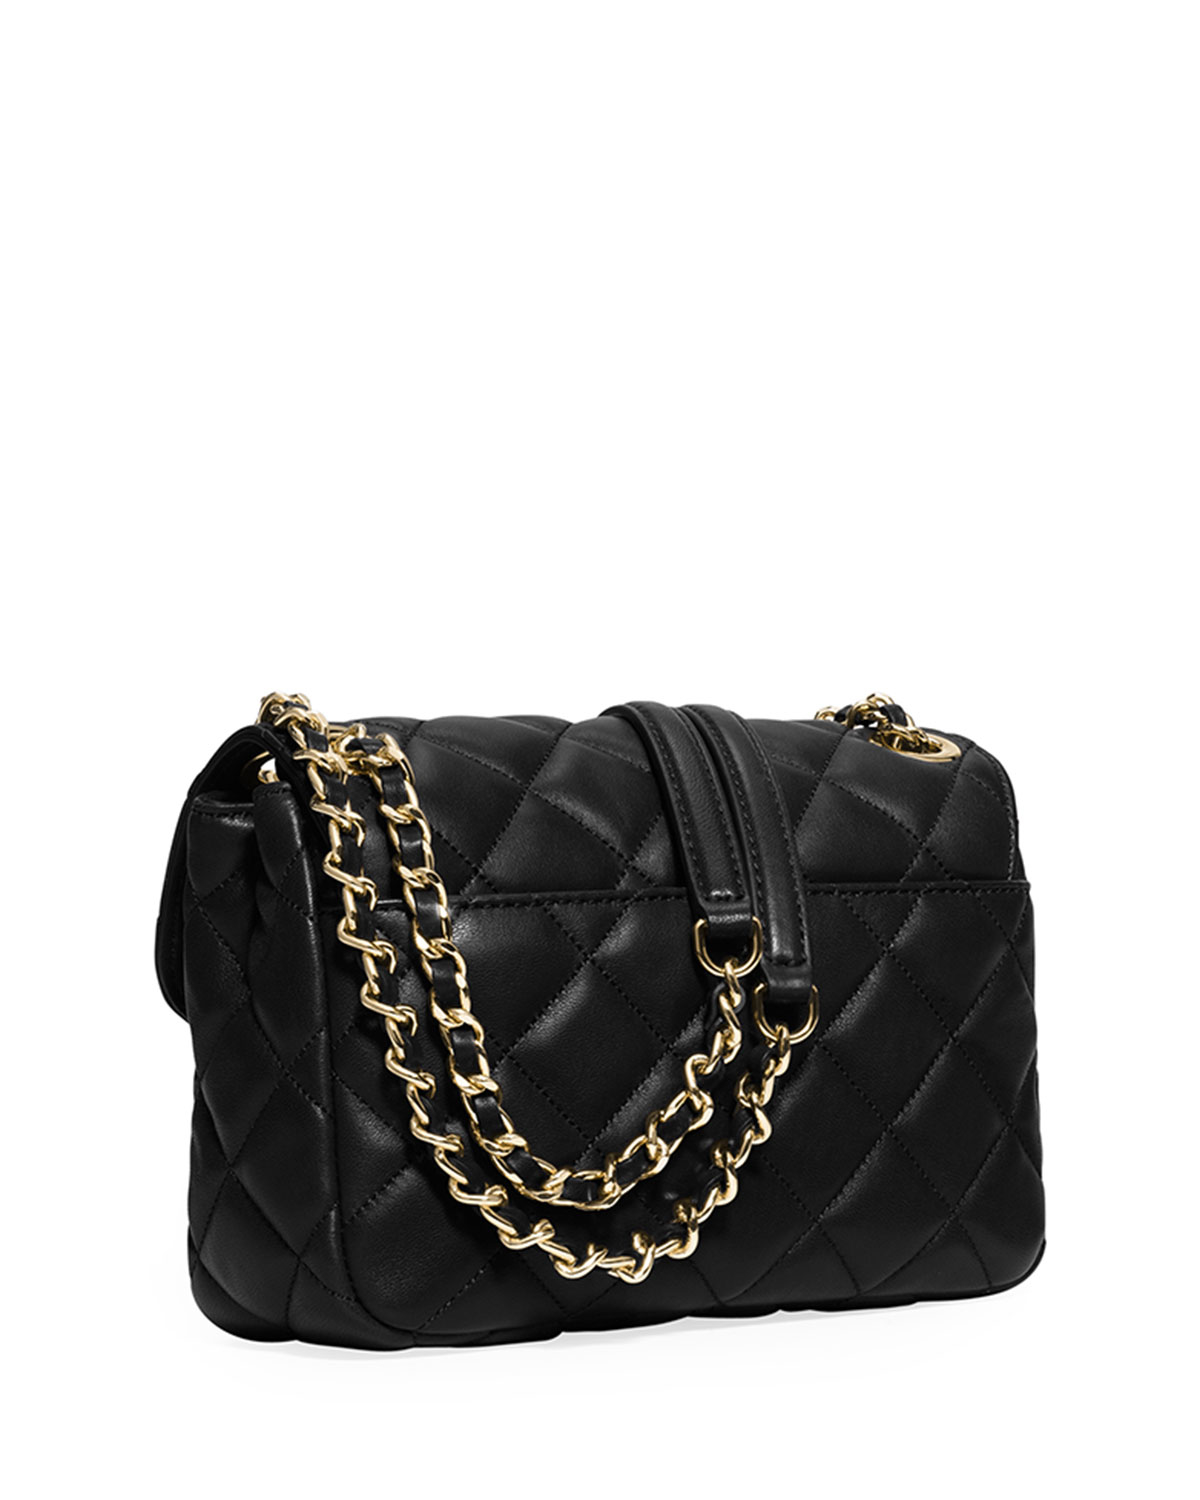 MICHAEL Michael Kors Sloan Small Quilted-Leather Shoulder Bag in Black - Lyst